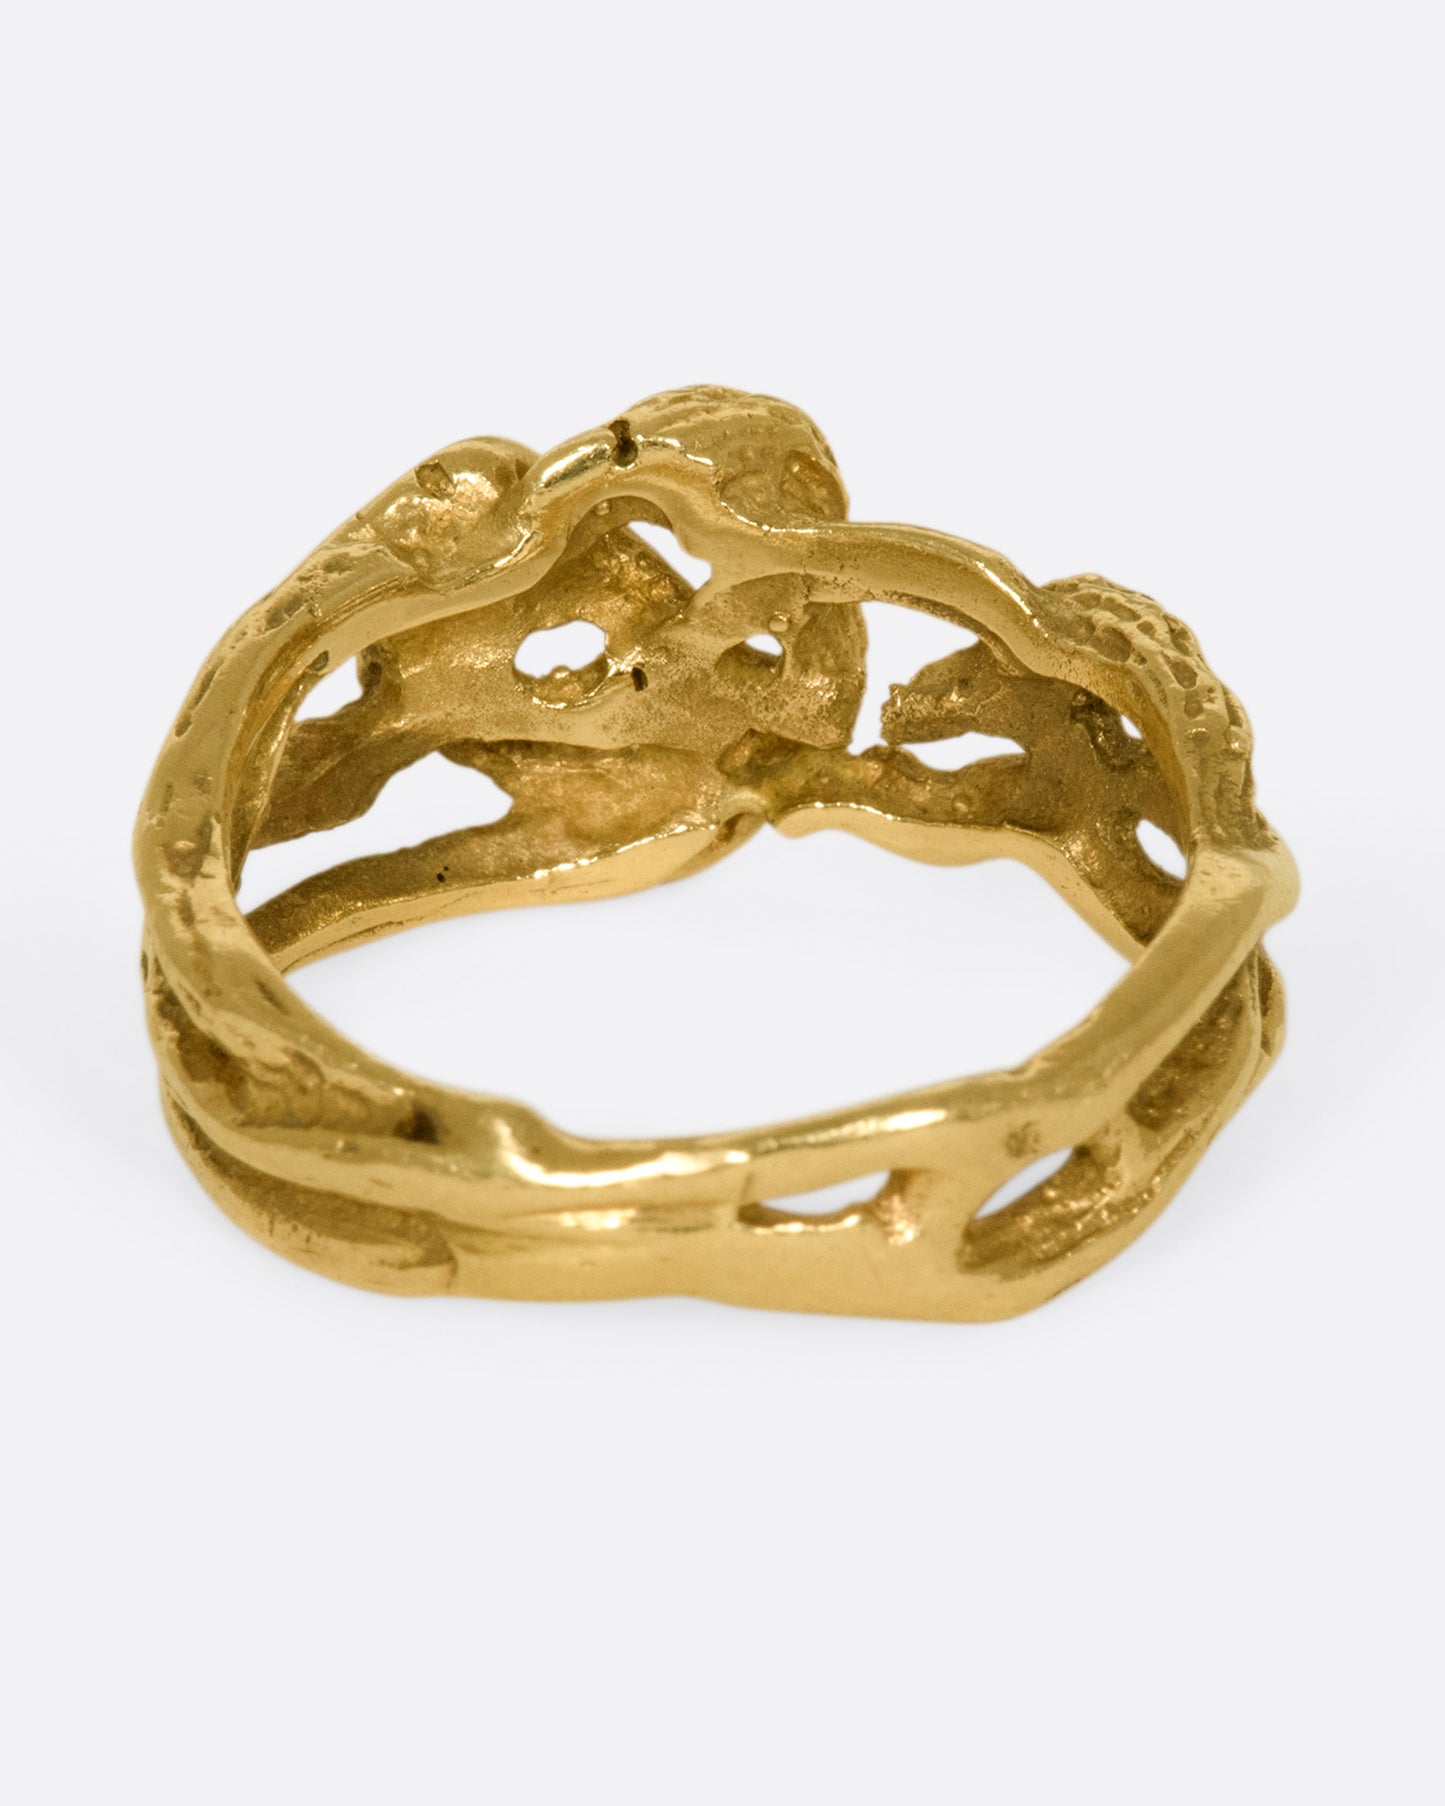 A vintage gold ring in the shape of interwoven vines.